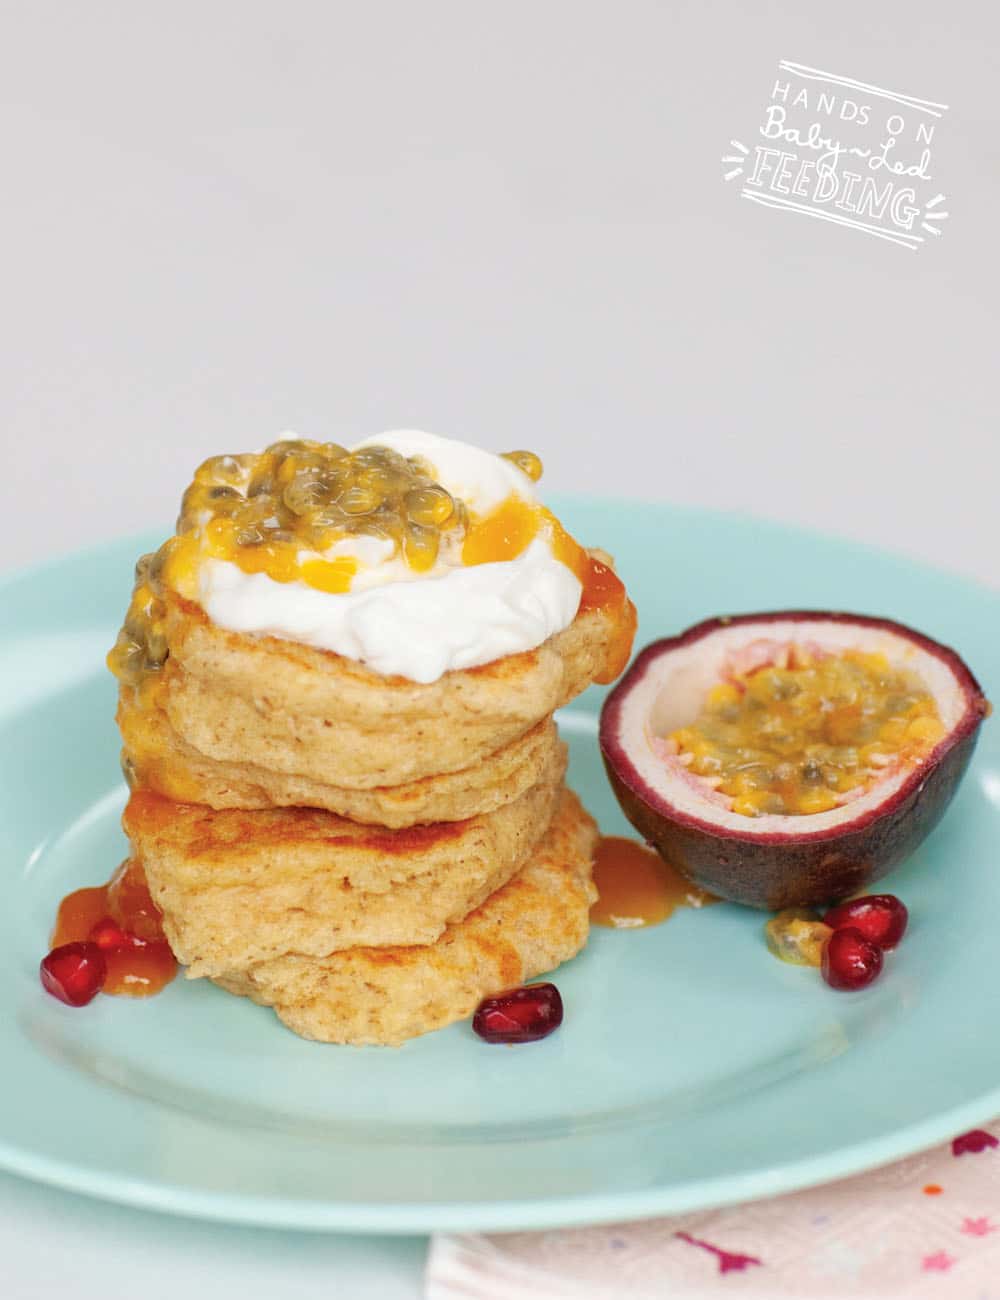 Healthy Oat Pancakes served with protein rich Greek yogurt and fresh sweet passion fruit. These refined sugar free pancakes are high in fiber and protein. Pancakes are my favorite finger food because I can make ahead and freeze them for busy days. #breakfast #babyledweaning #toddlerfood #refinedsugarfree #fingerfood